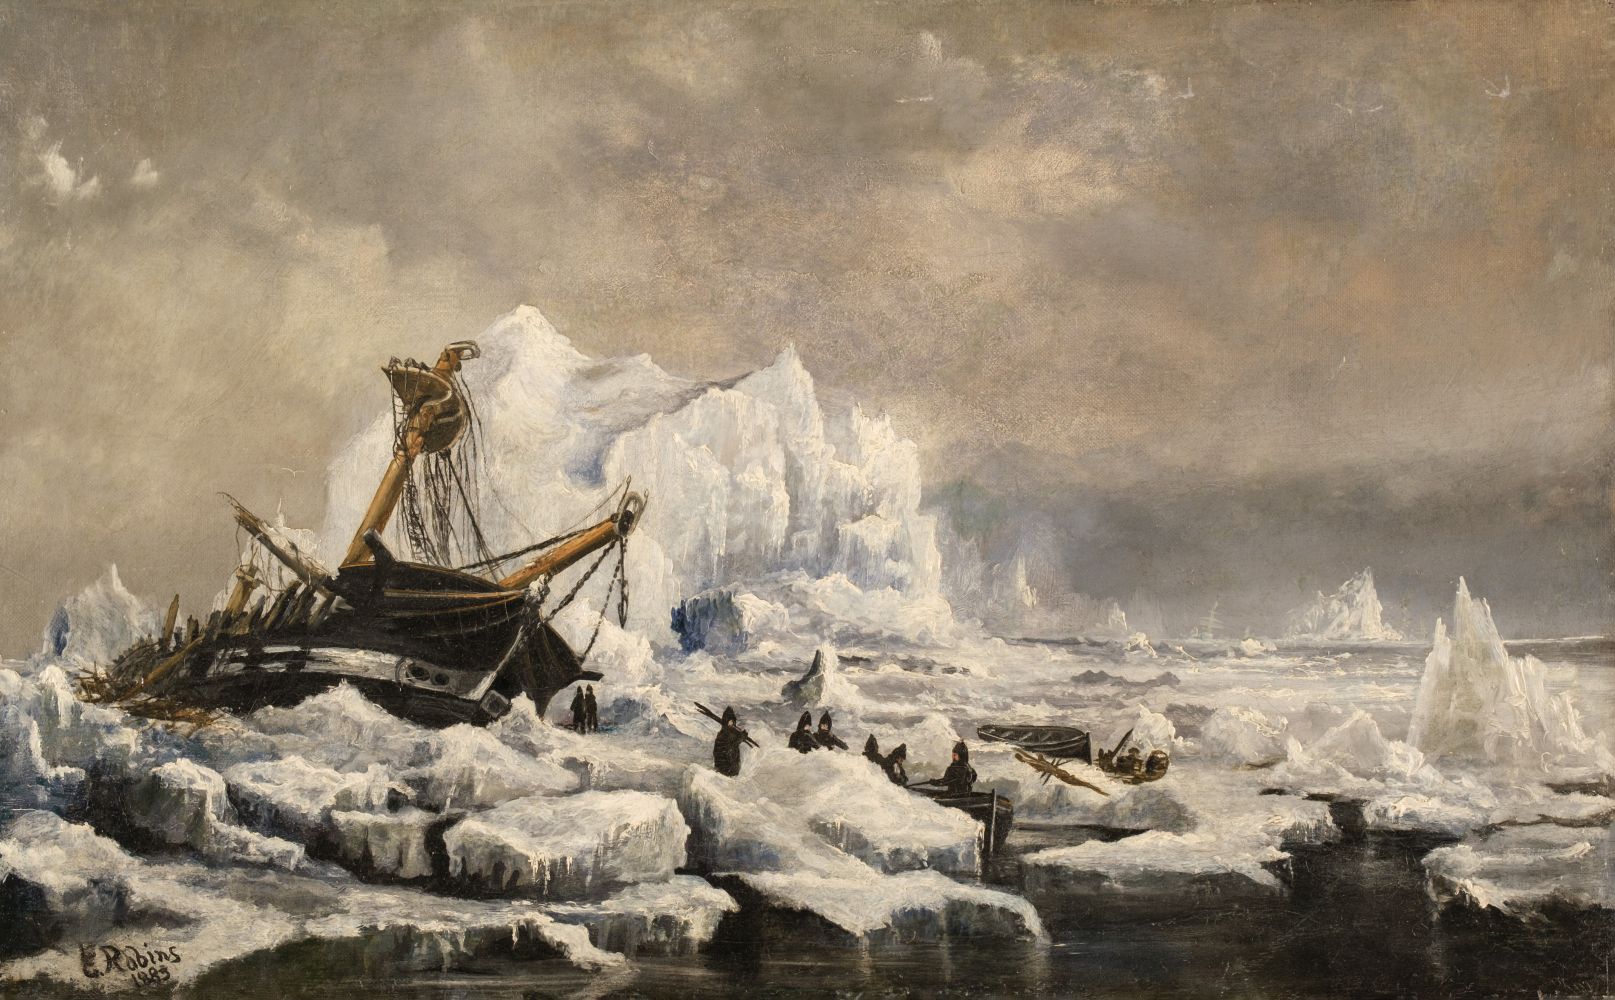 Robins (E., active 1882-1902). Arctic expedition ship and crew trapped in ice, 1883